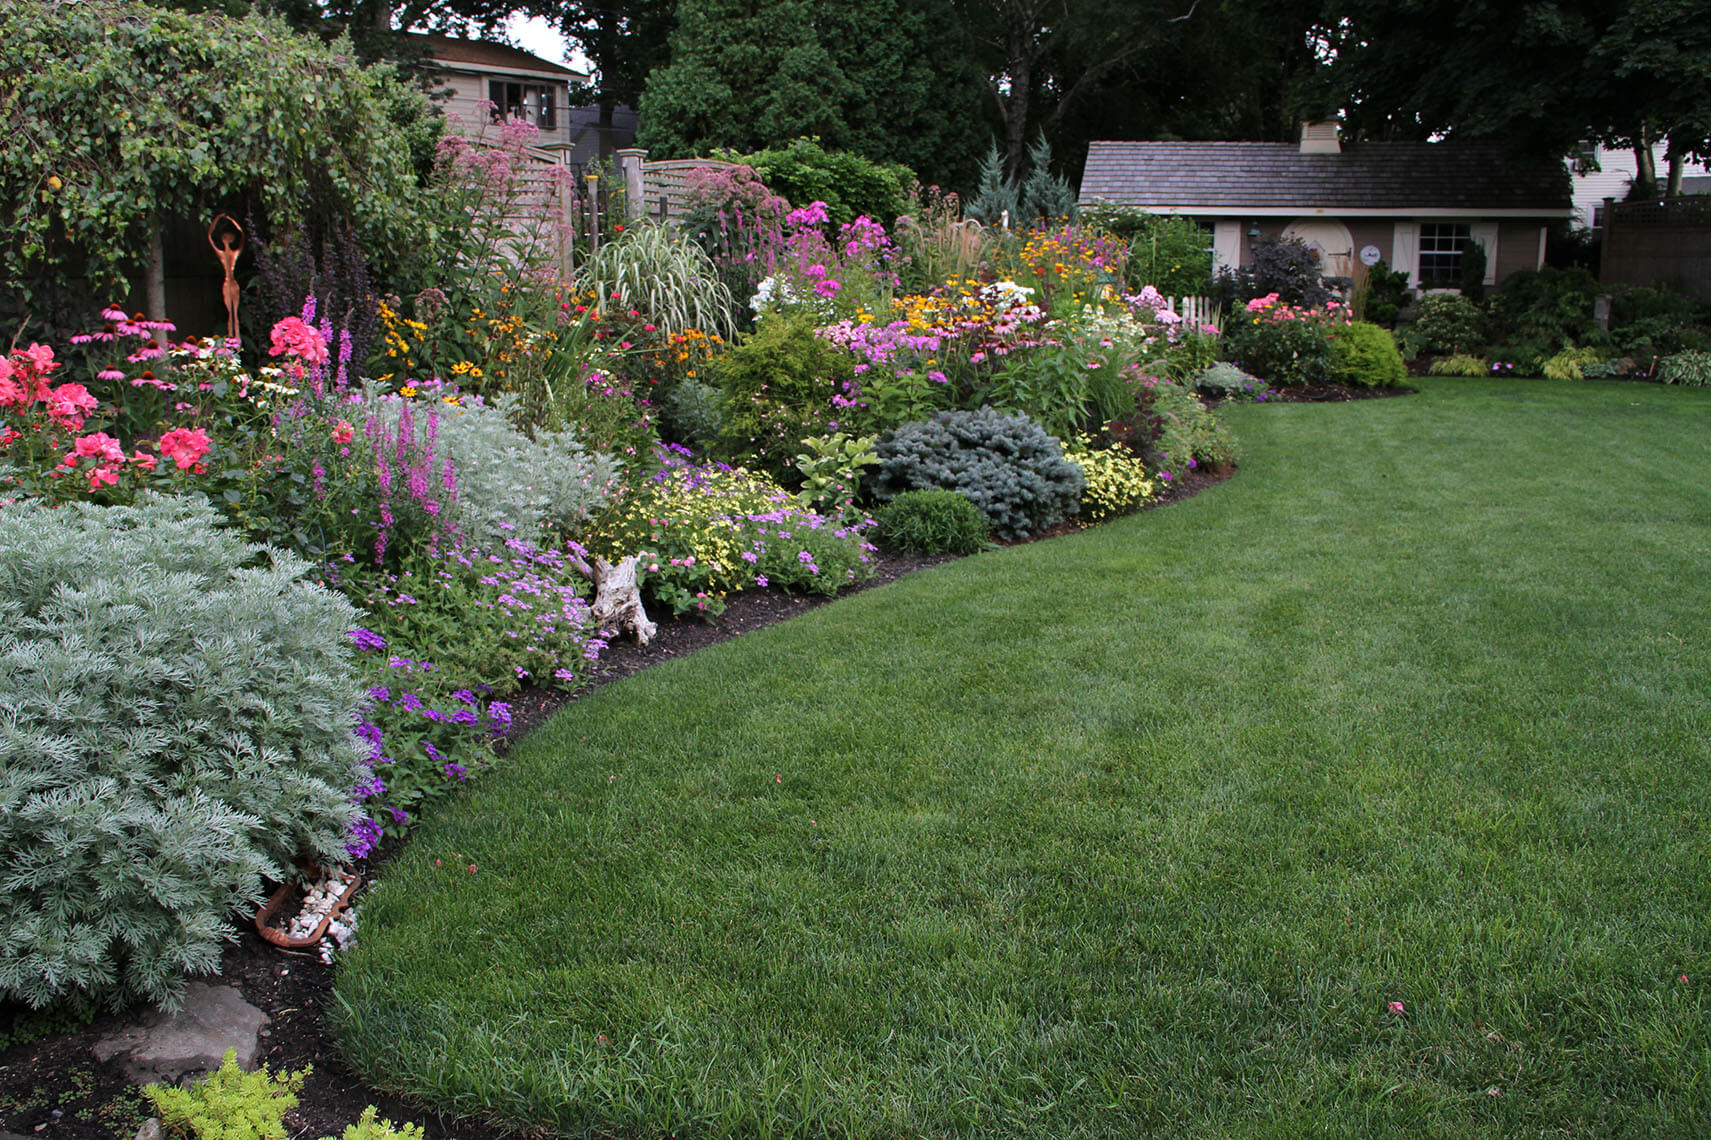 A mowed lawn and garden of shrubs.